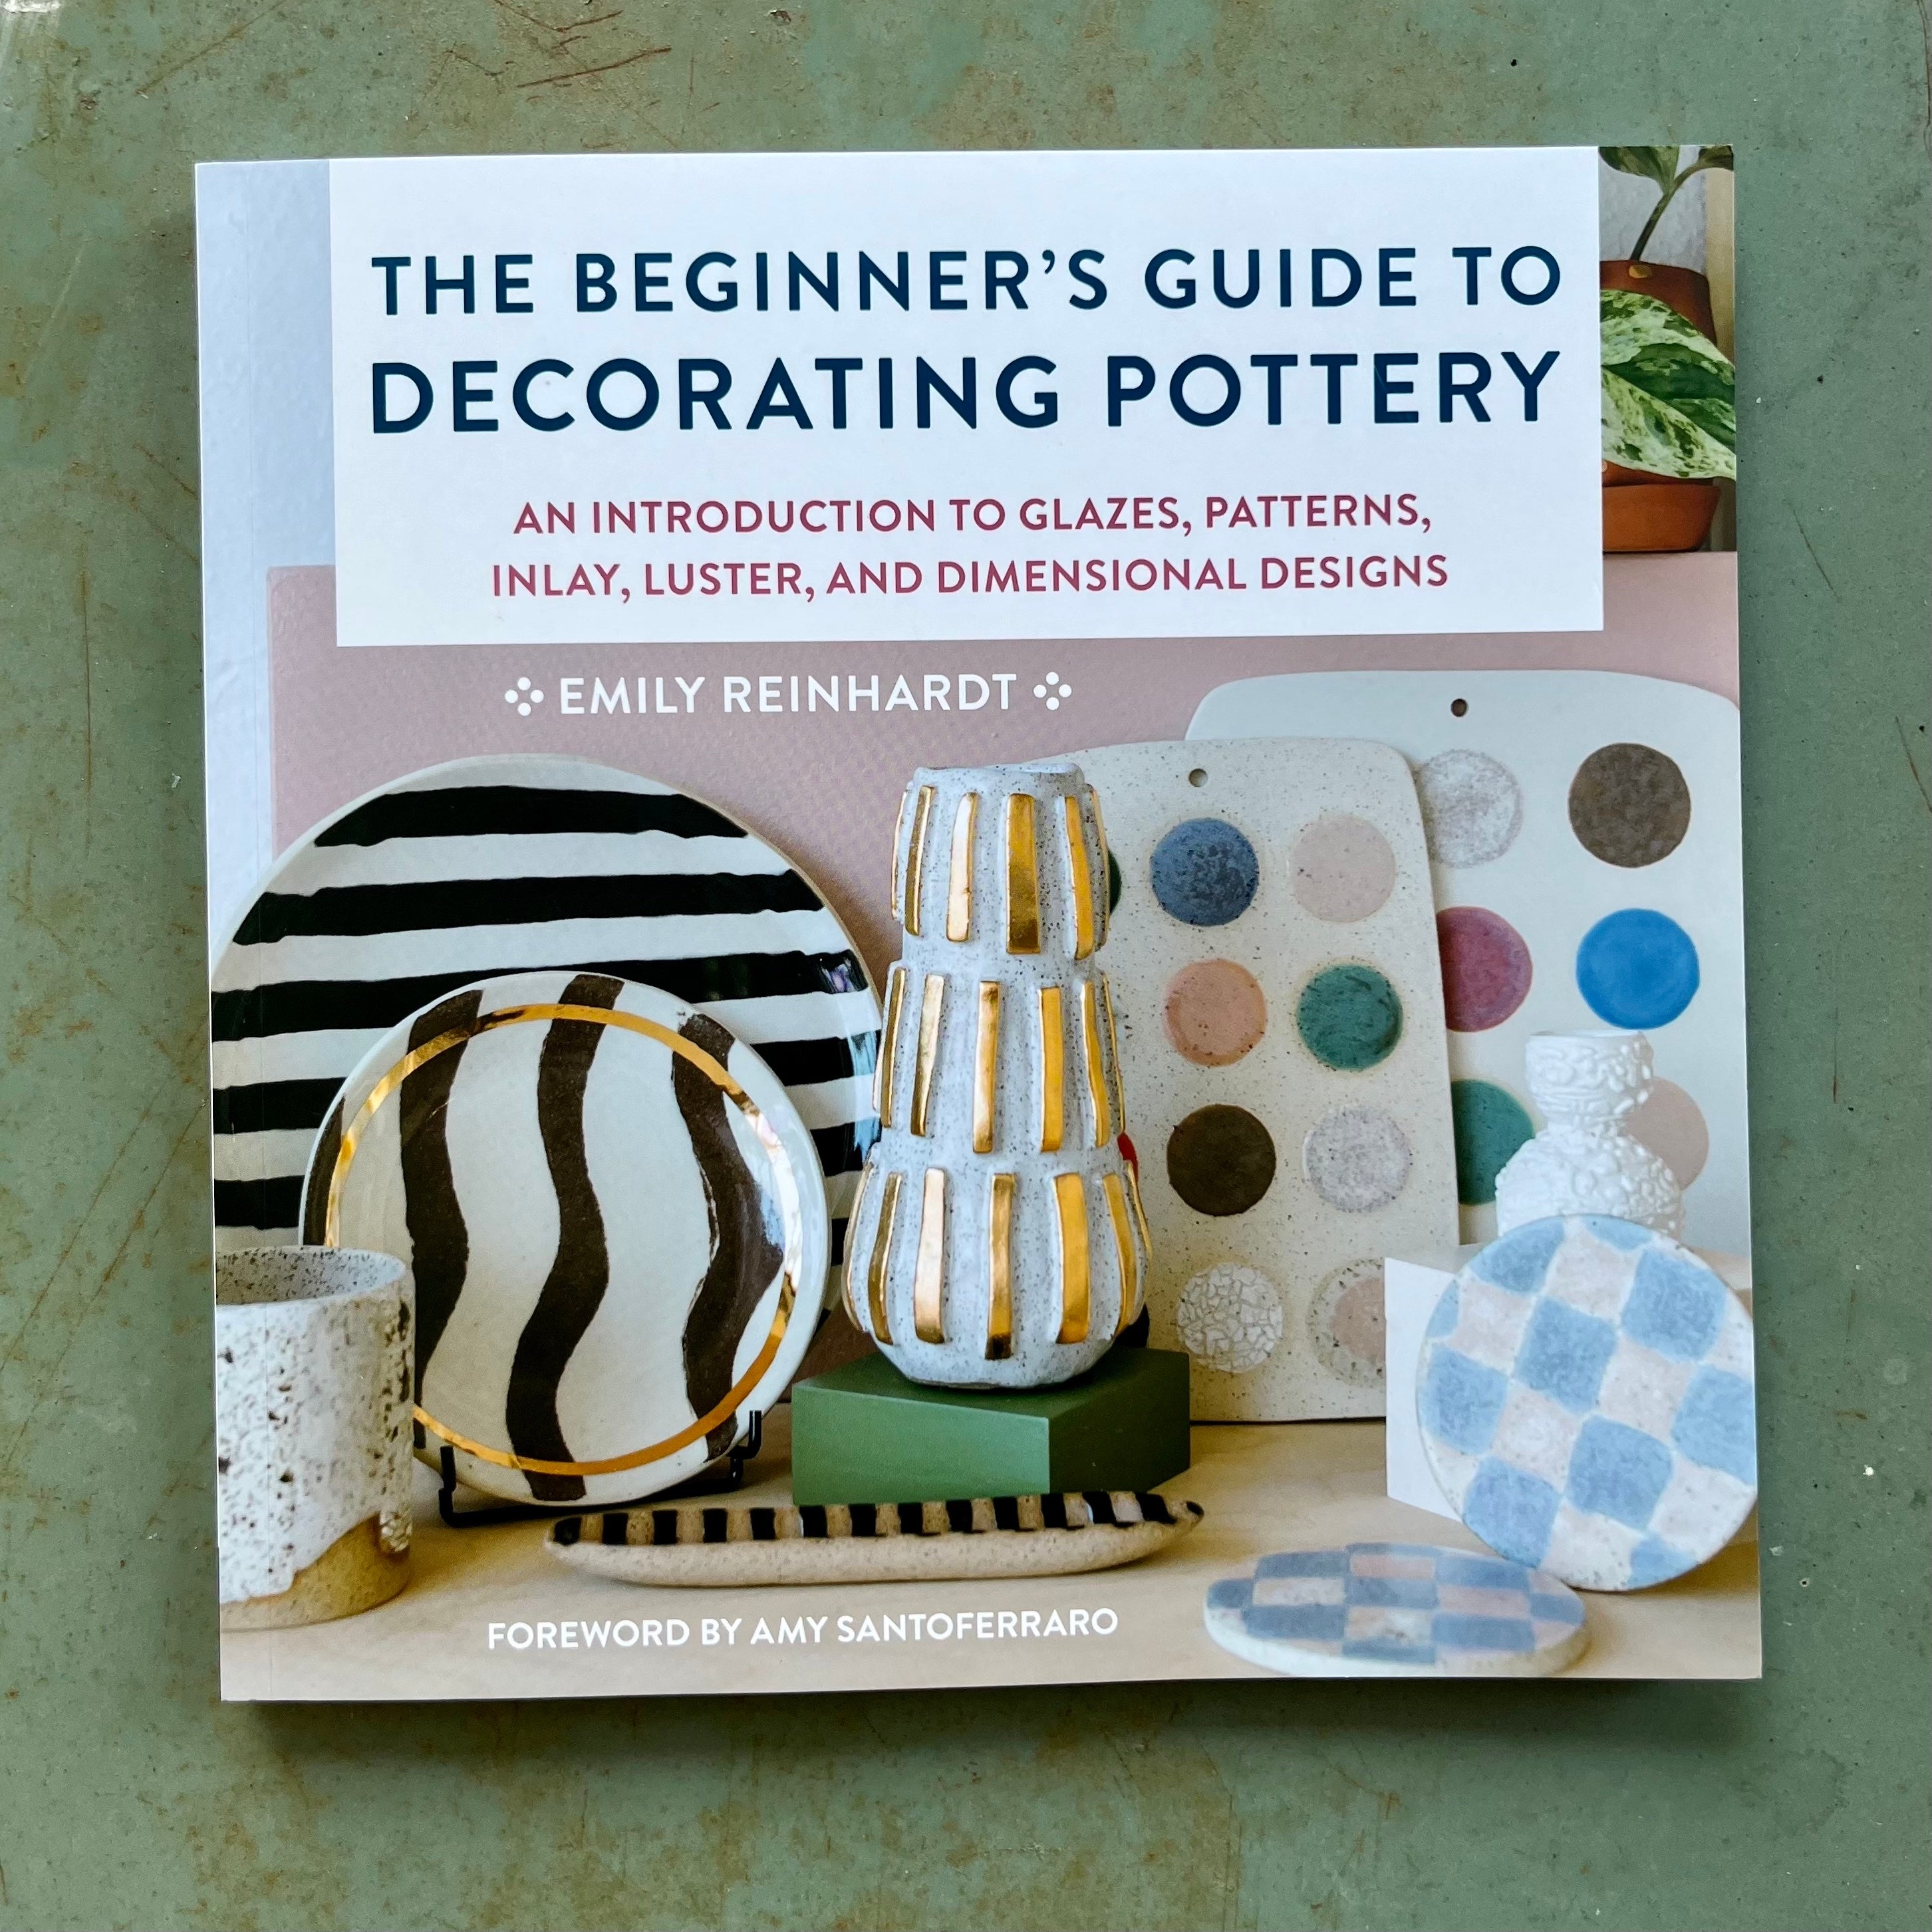 Quarry Books-The Art Of Modern Quilling 